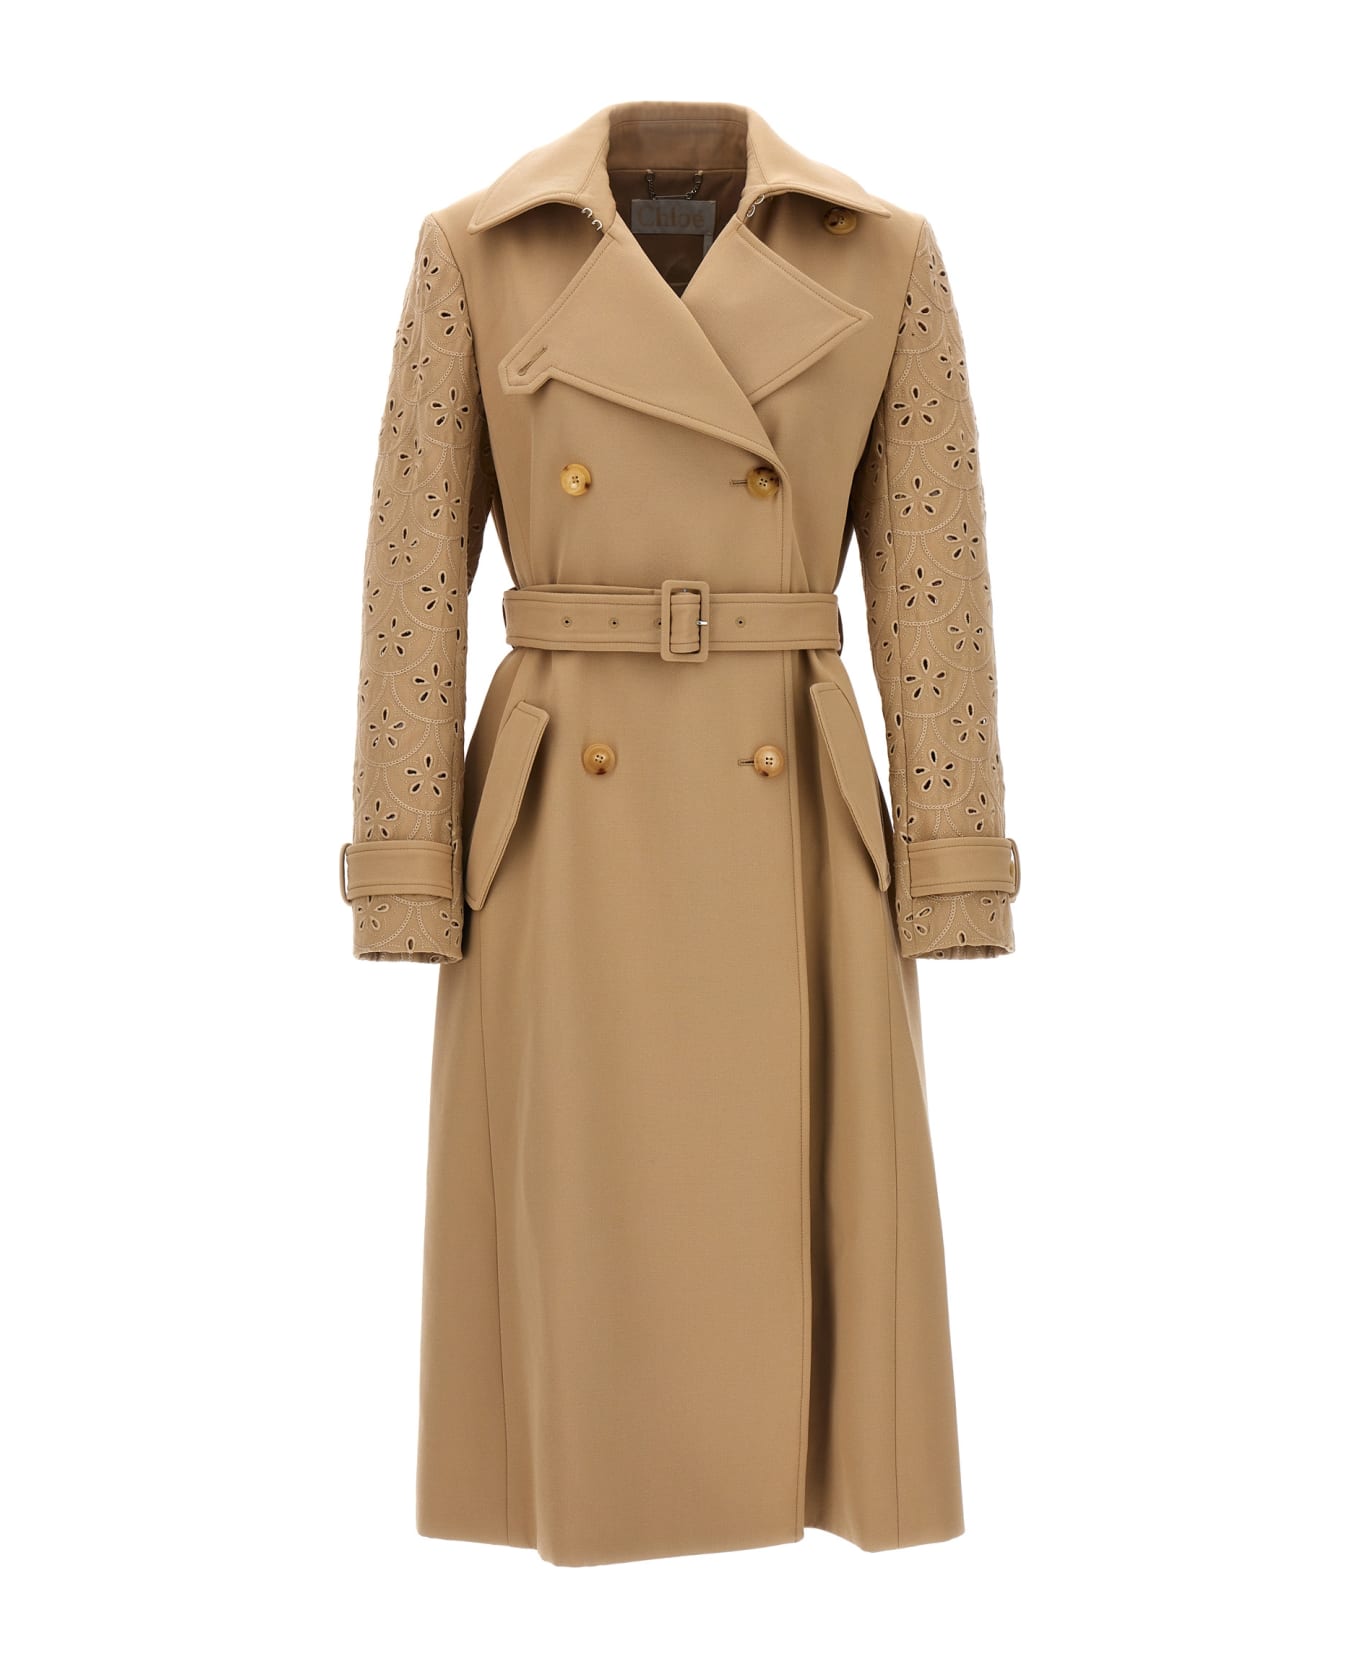 Chloé Embroidered Hooded Trench Coat - Beige